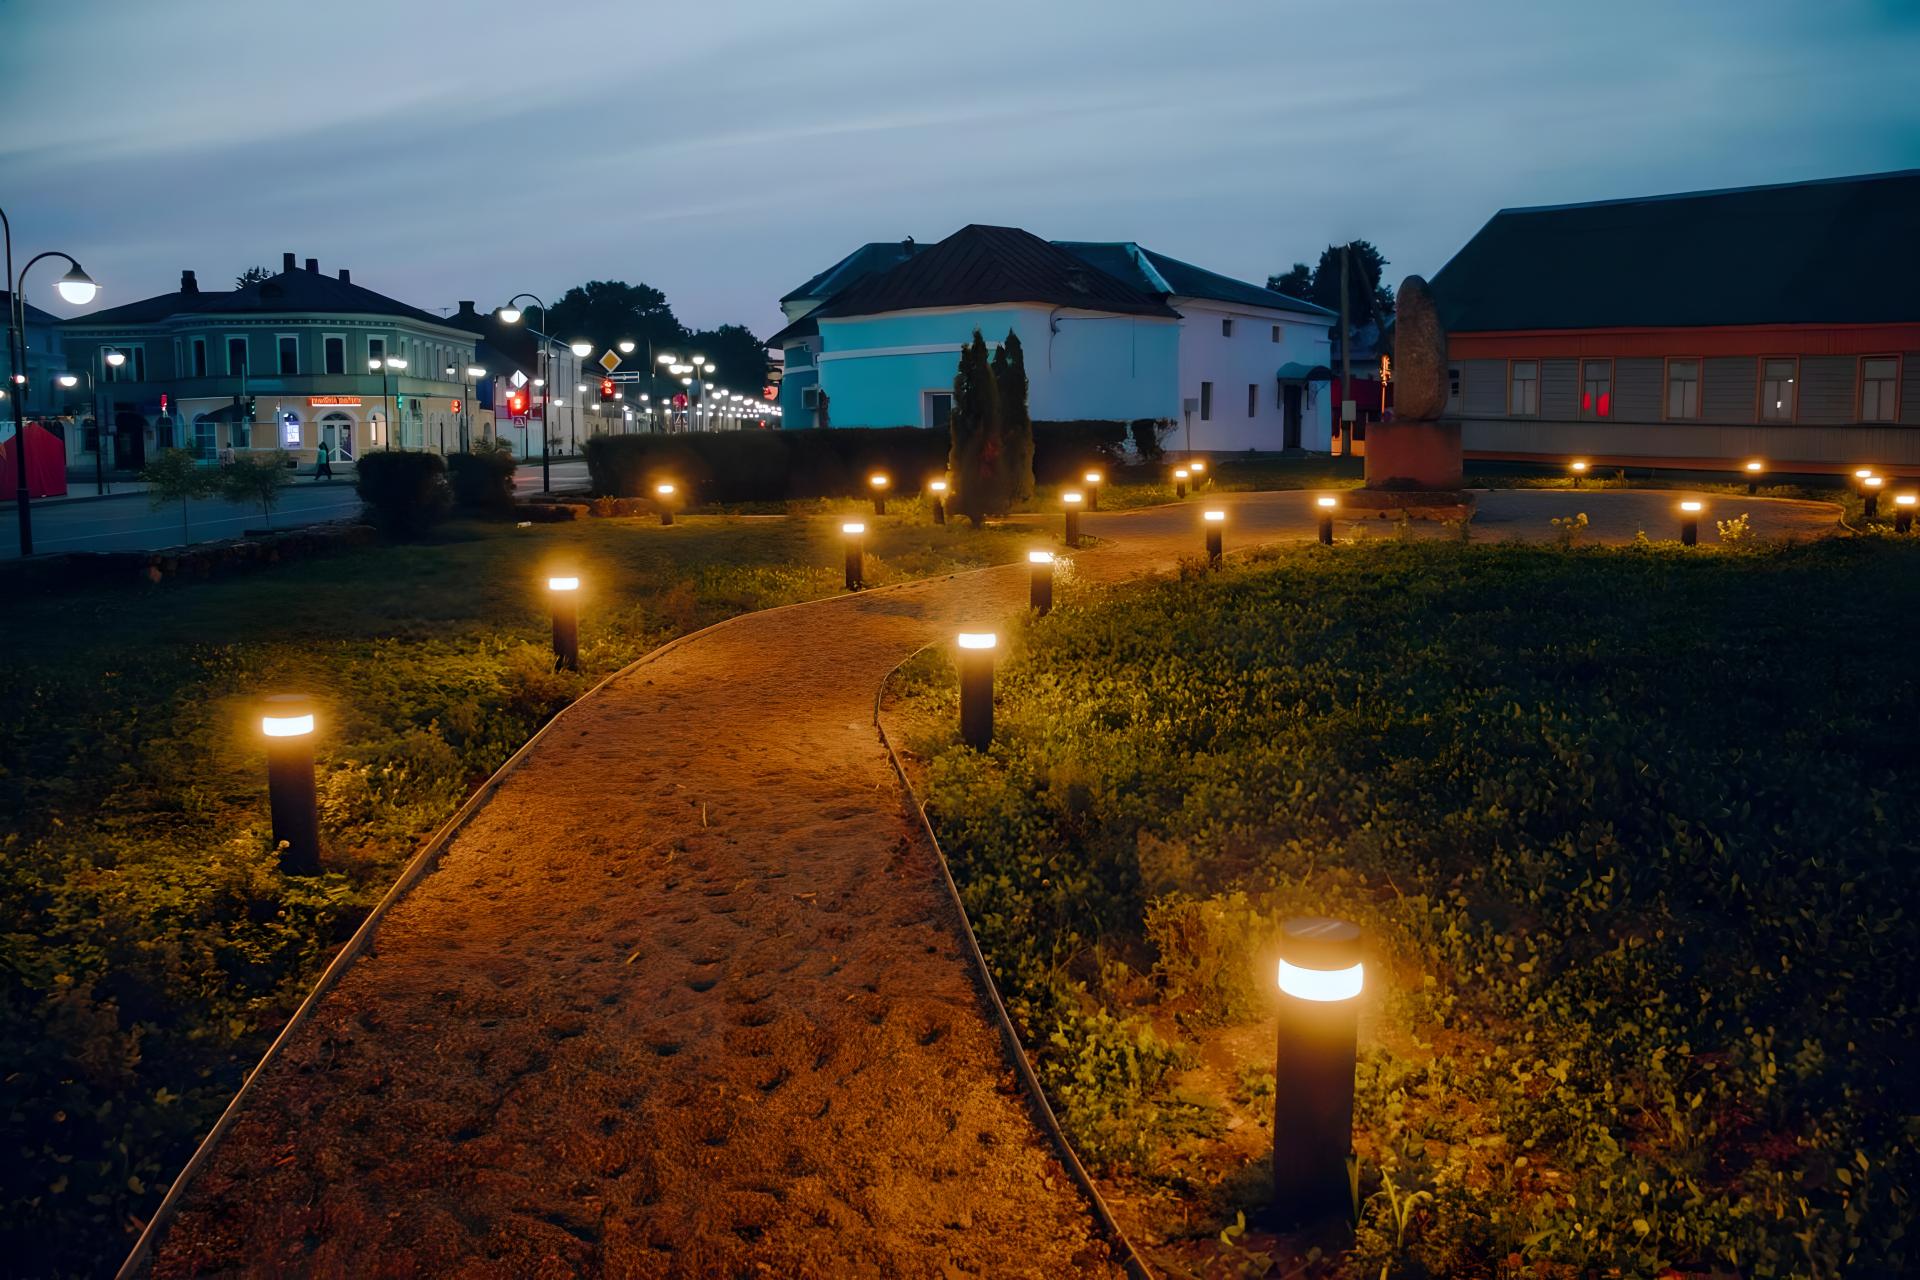 Landscape Lighting of the Square